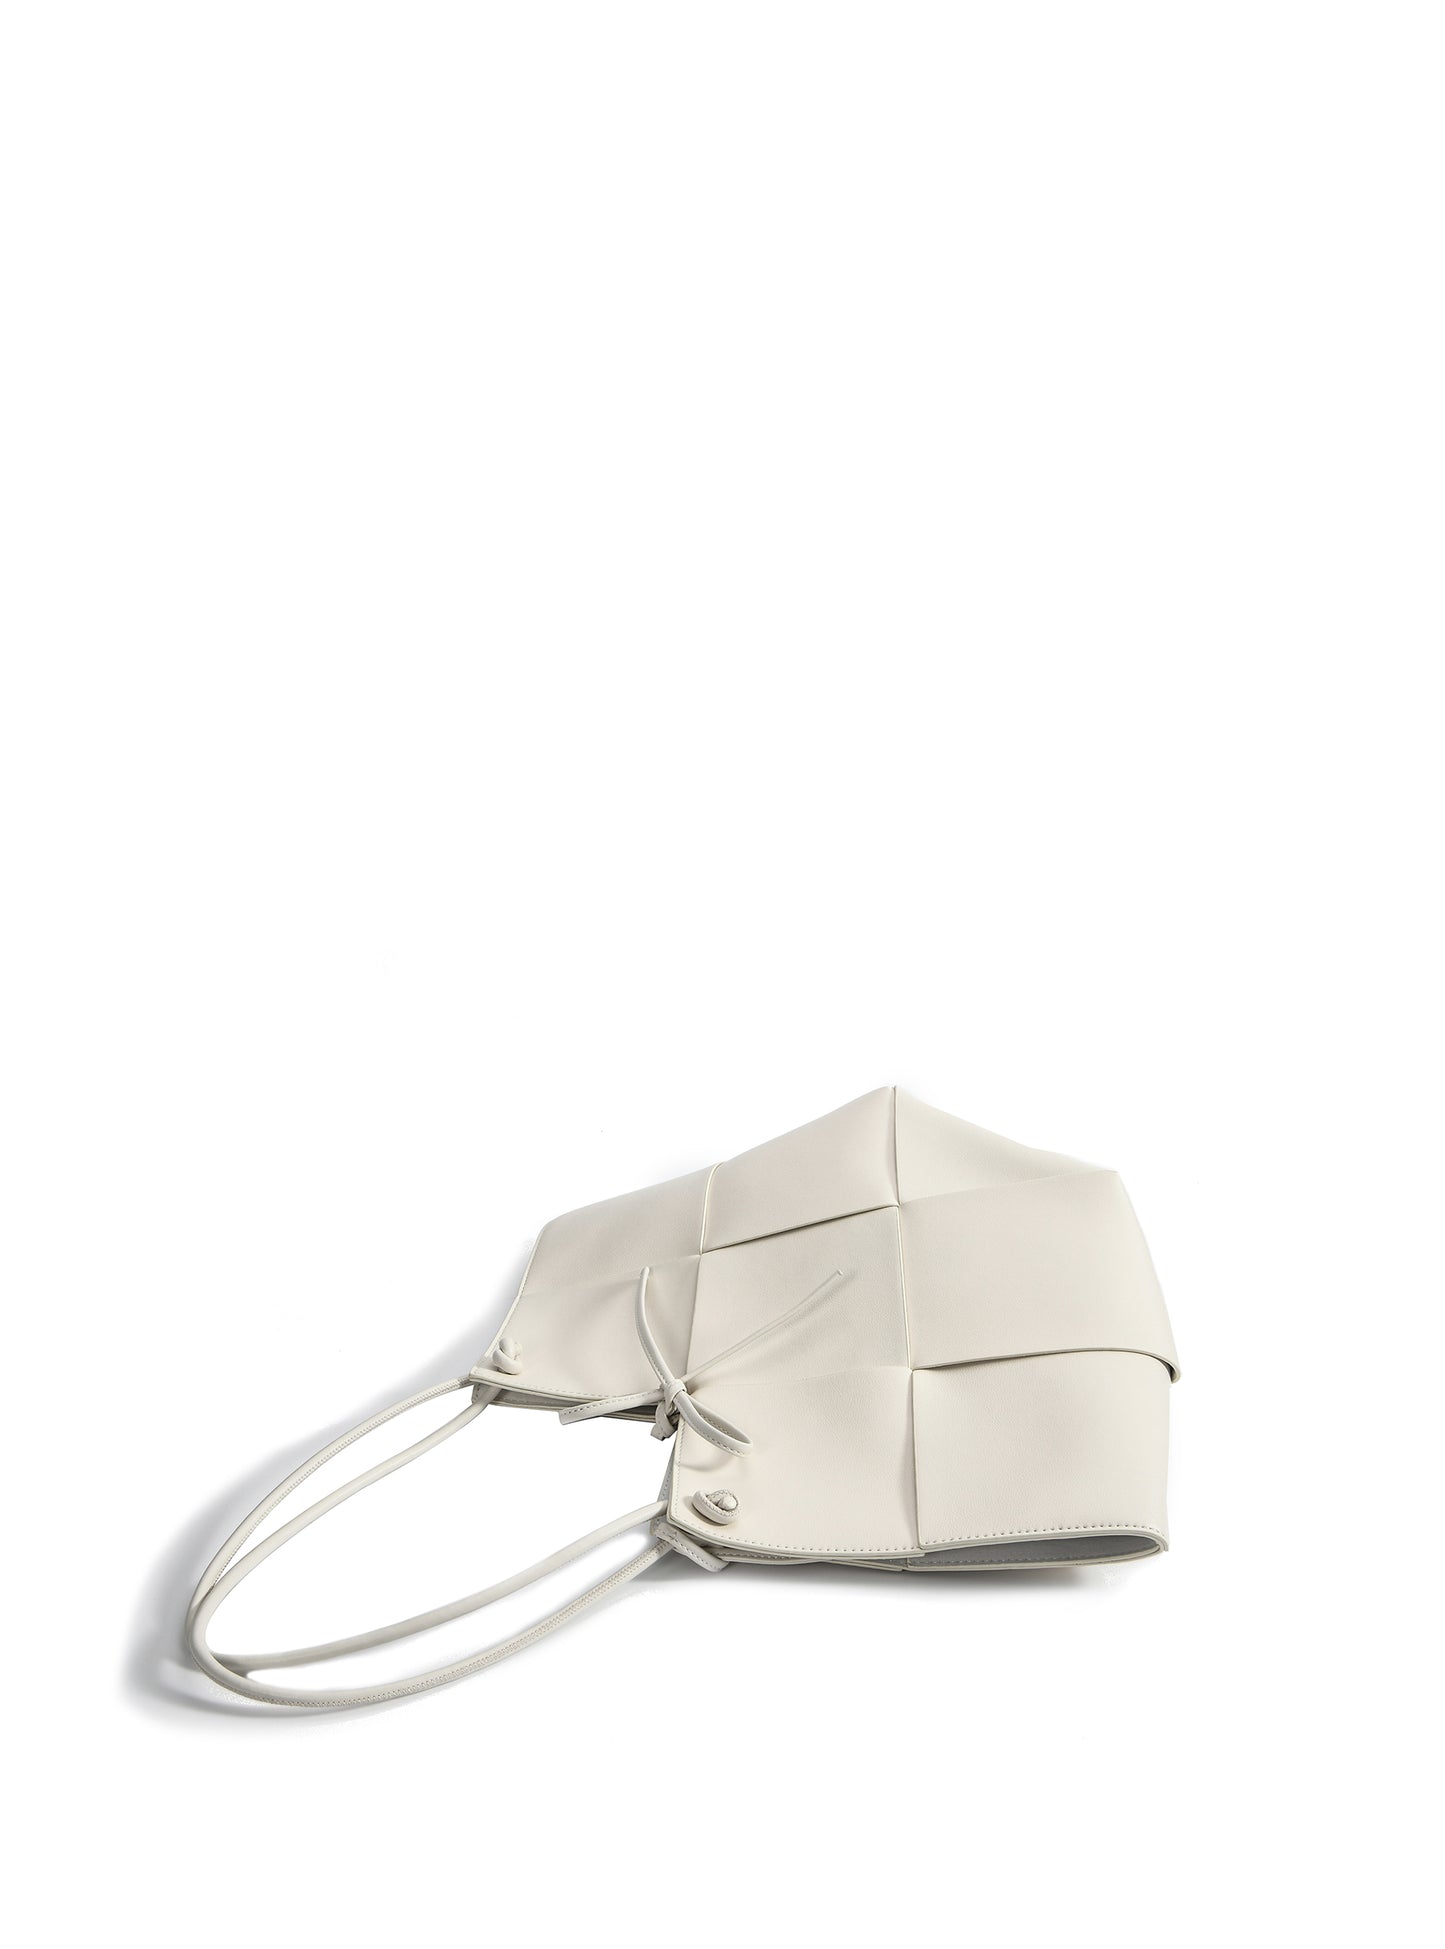 Taylor Contexture Leather Bag, Off White